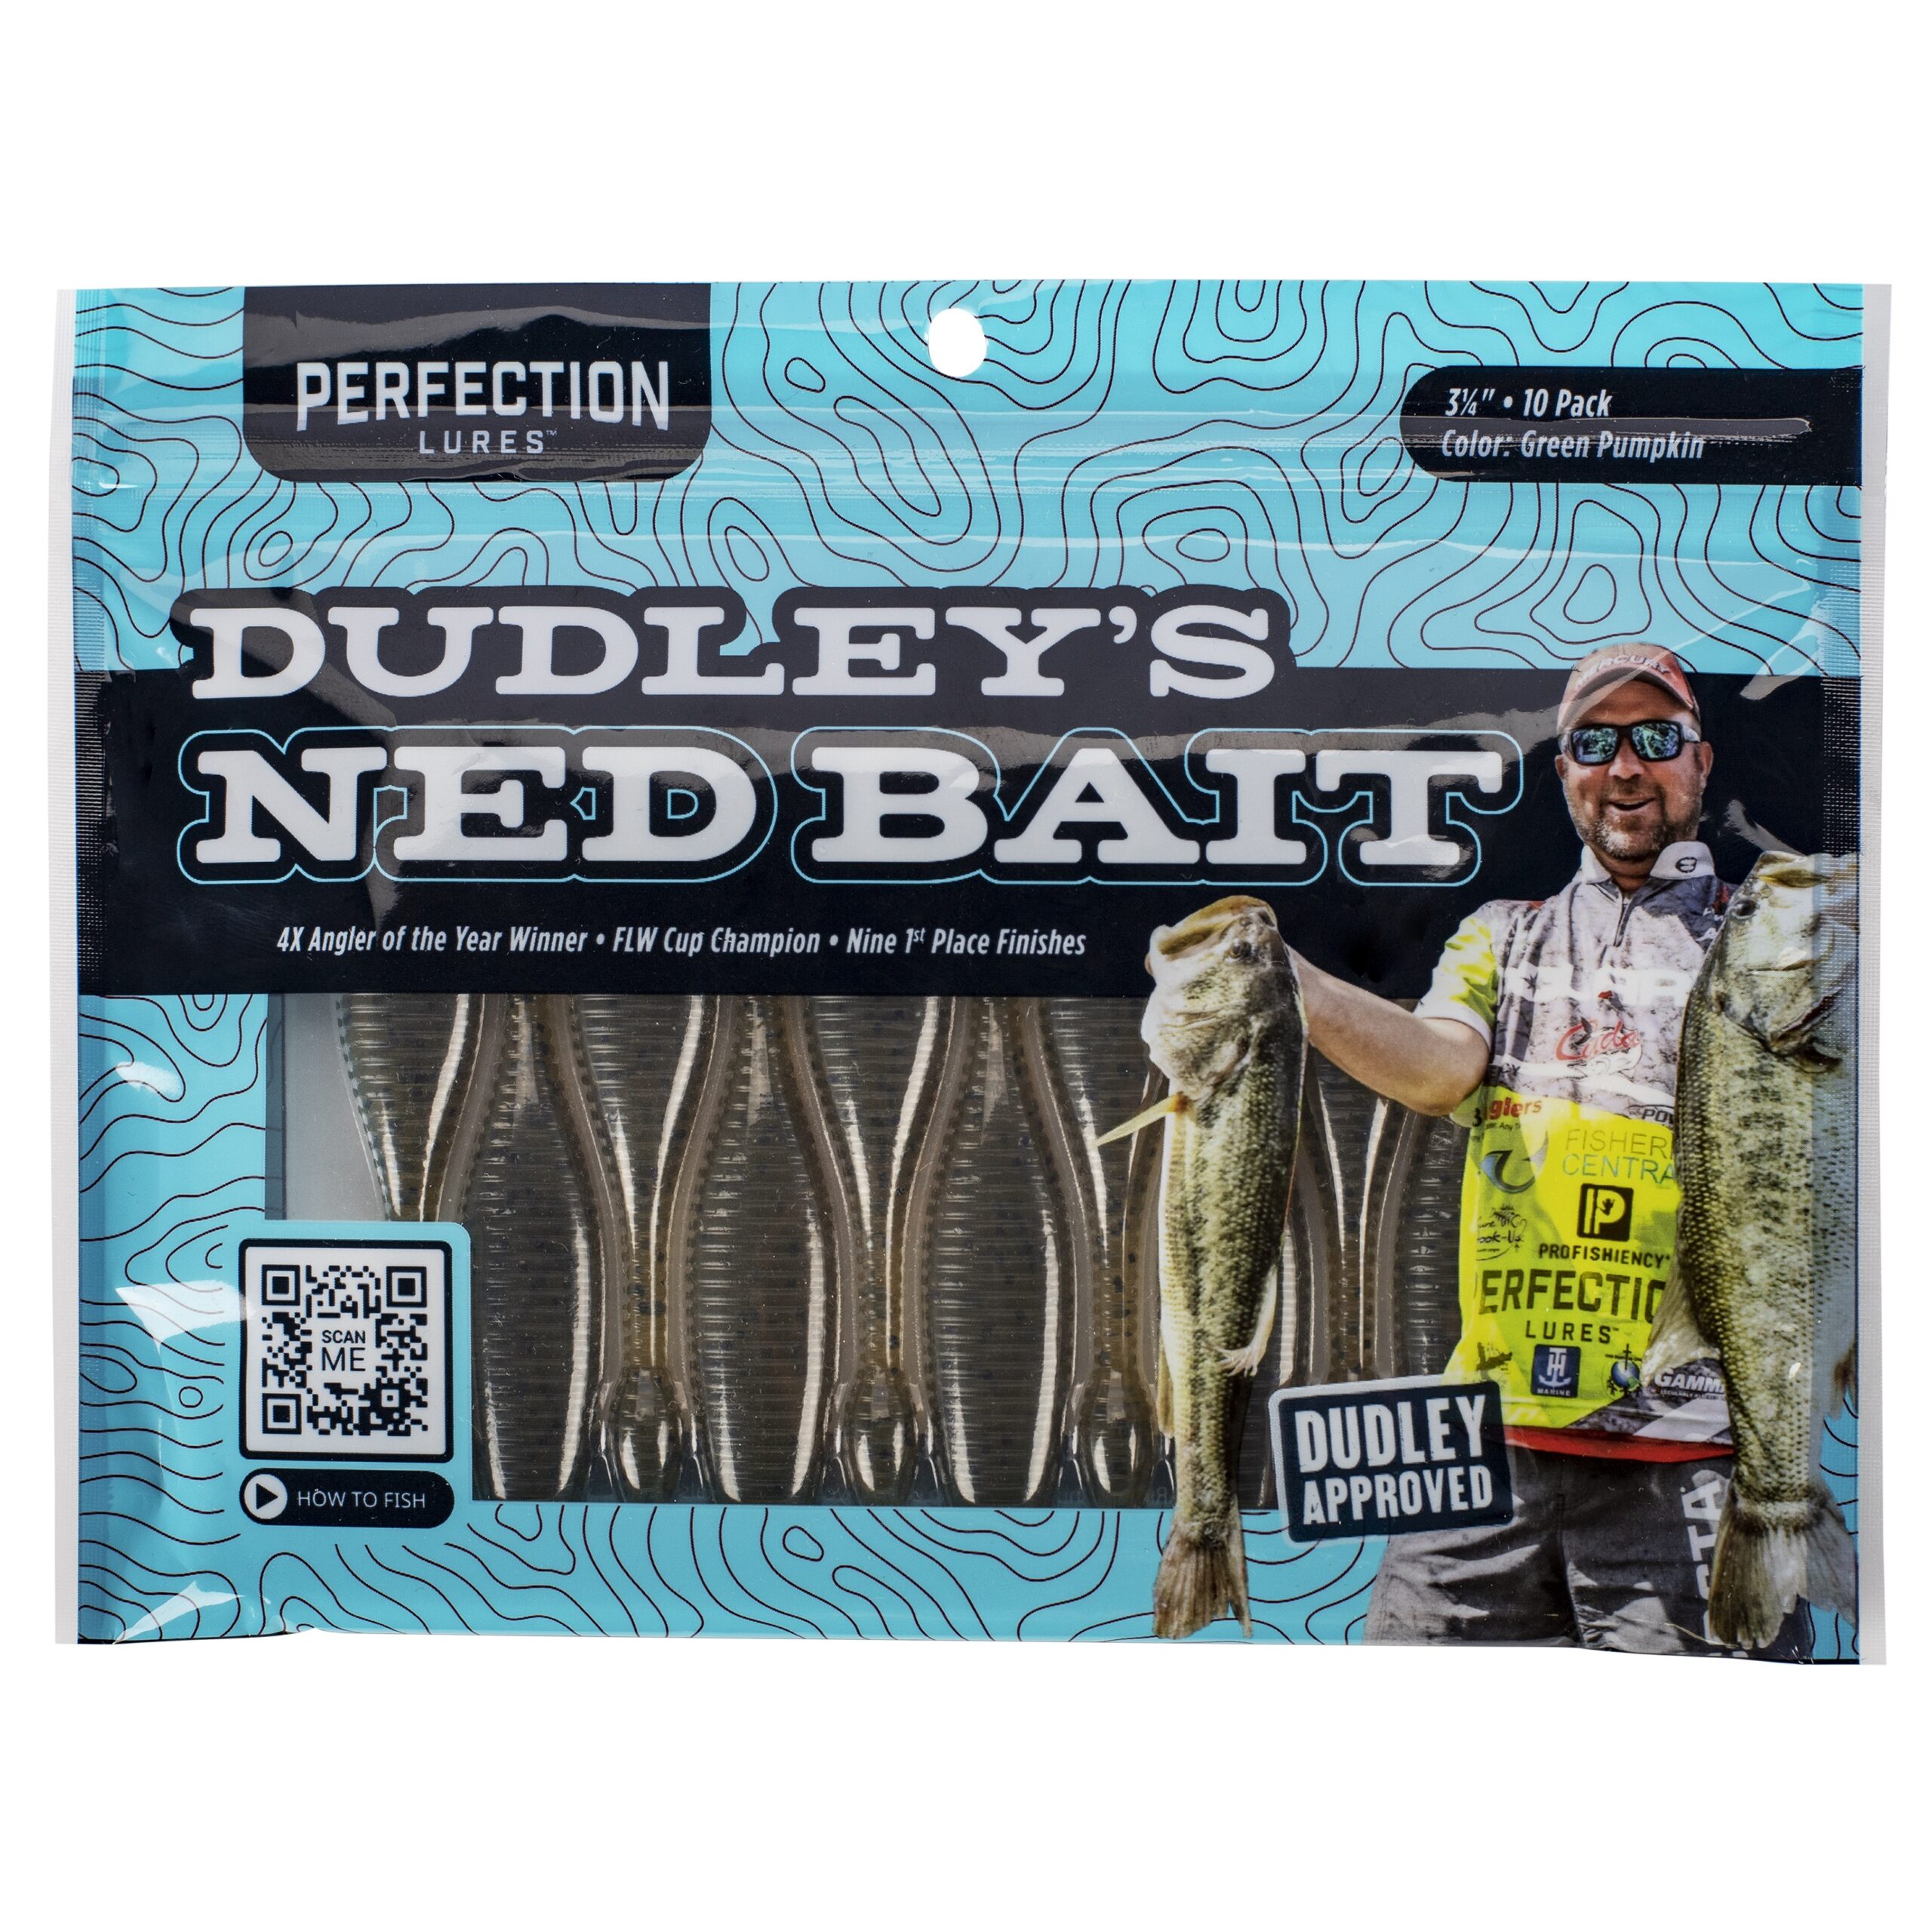 Dudley's Wacky Perfection Lures 5 3/8 Houdini Worm - 3 Packs New 24 worms